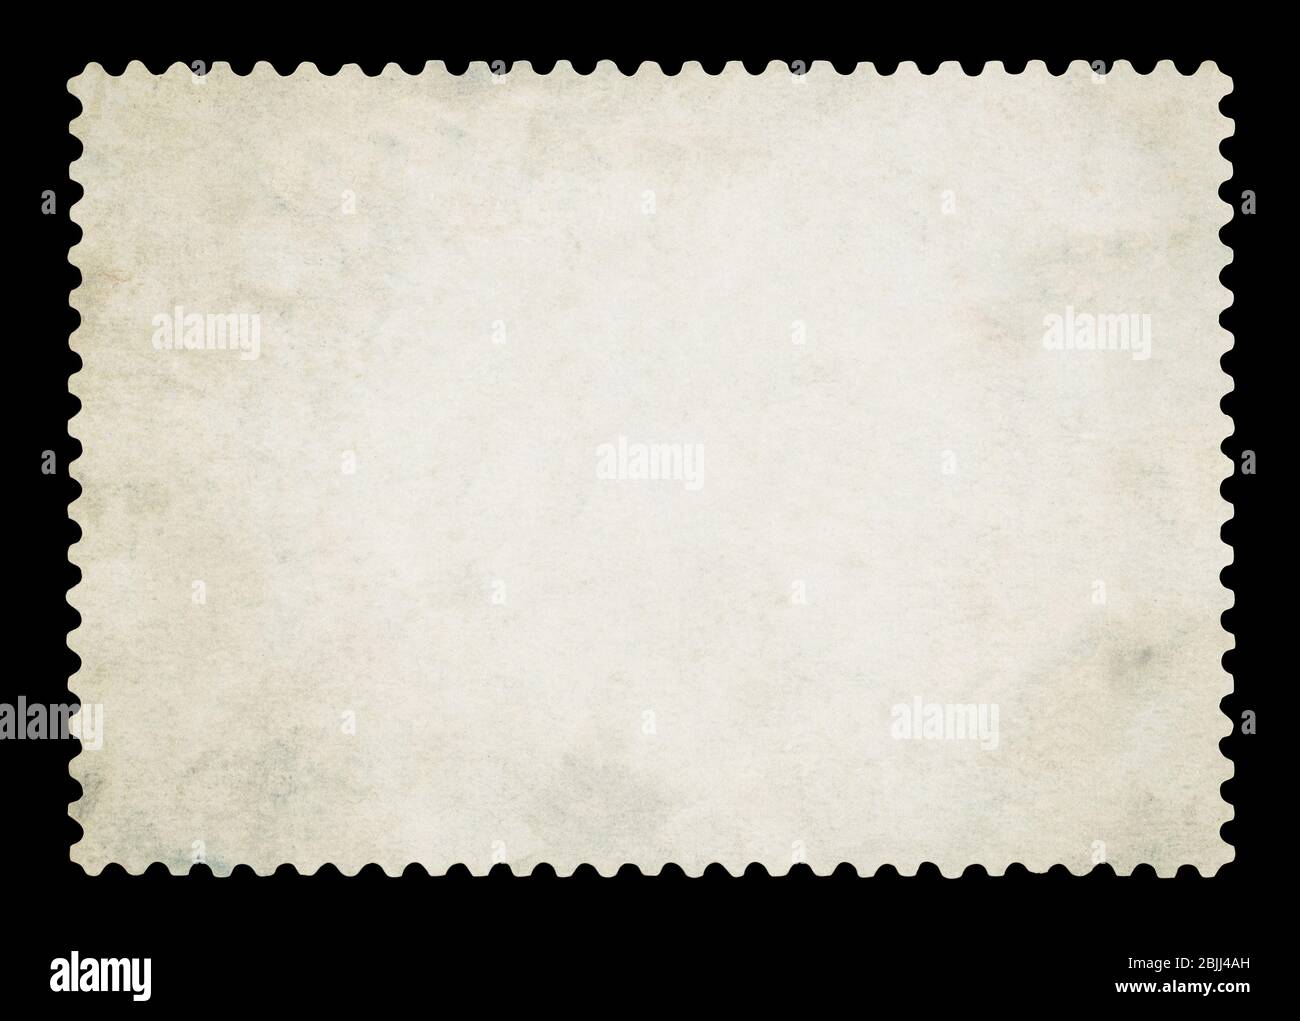 Blank postage stamp - Isolated on Black background Stock Photo